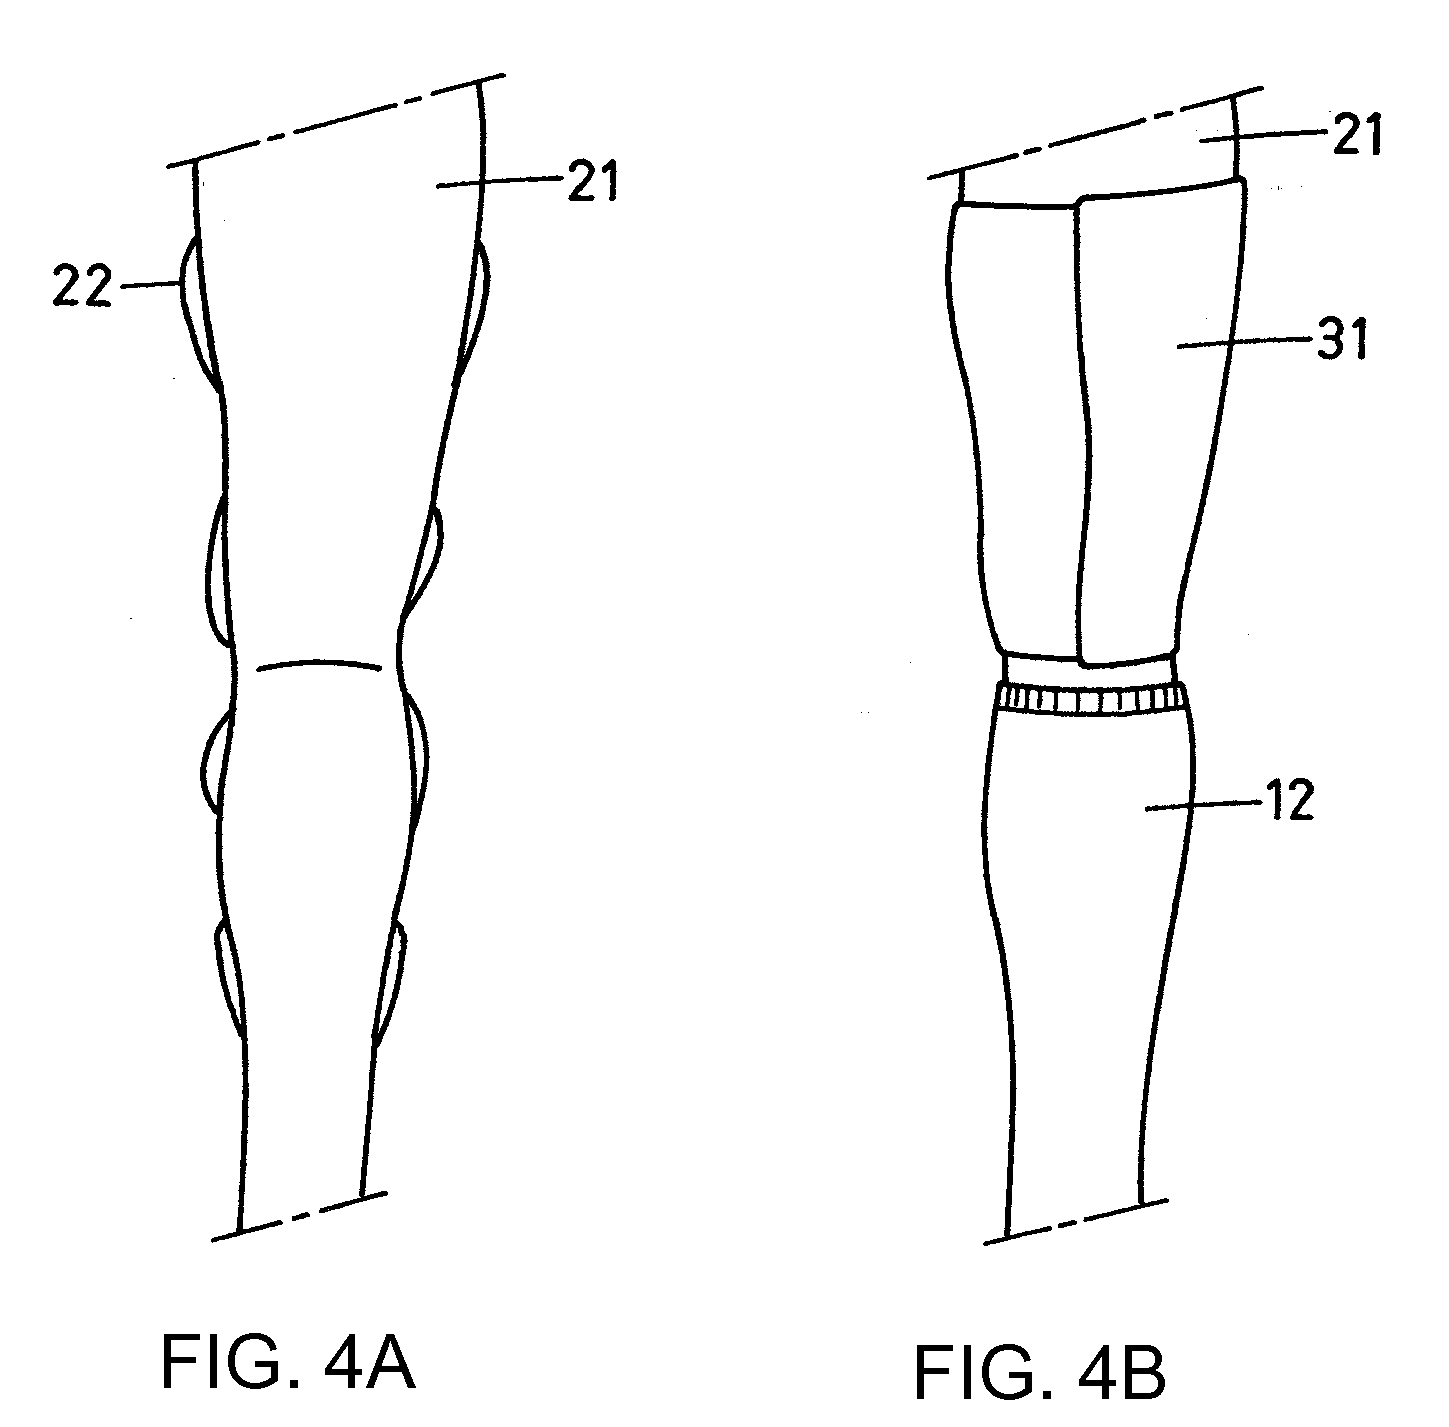 Method and Device for Tending or Treating Body Tissue or for Shaping the Figure